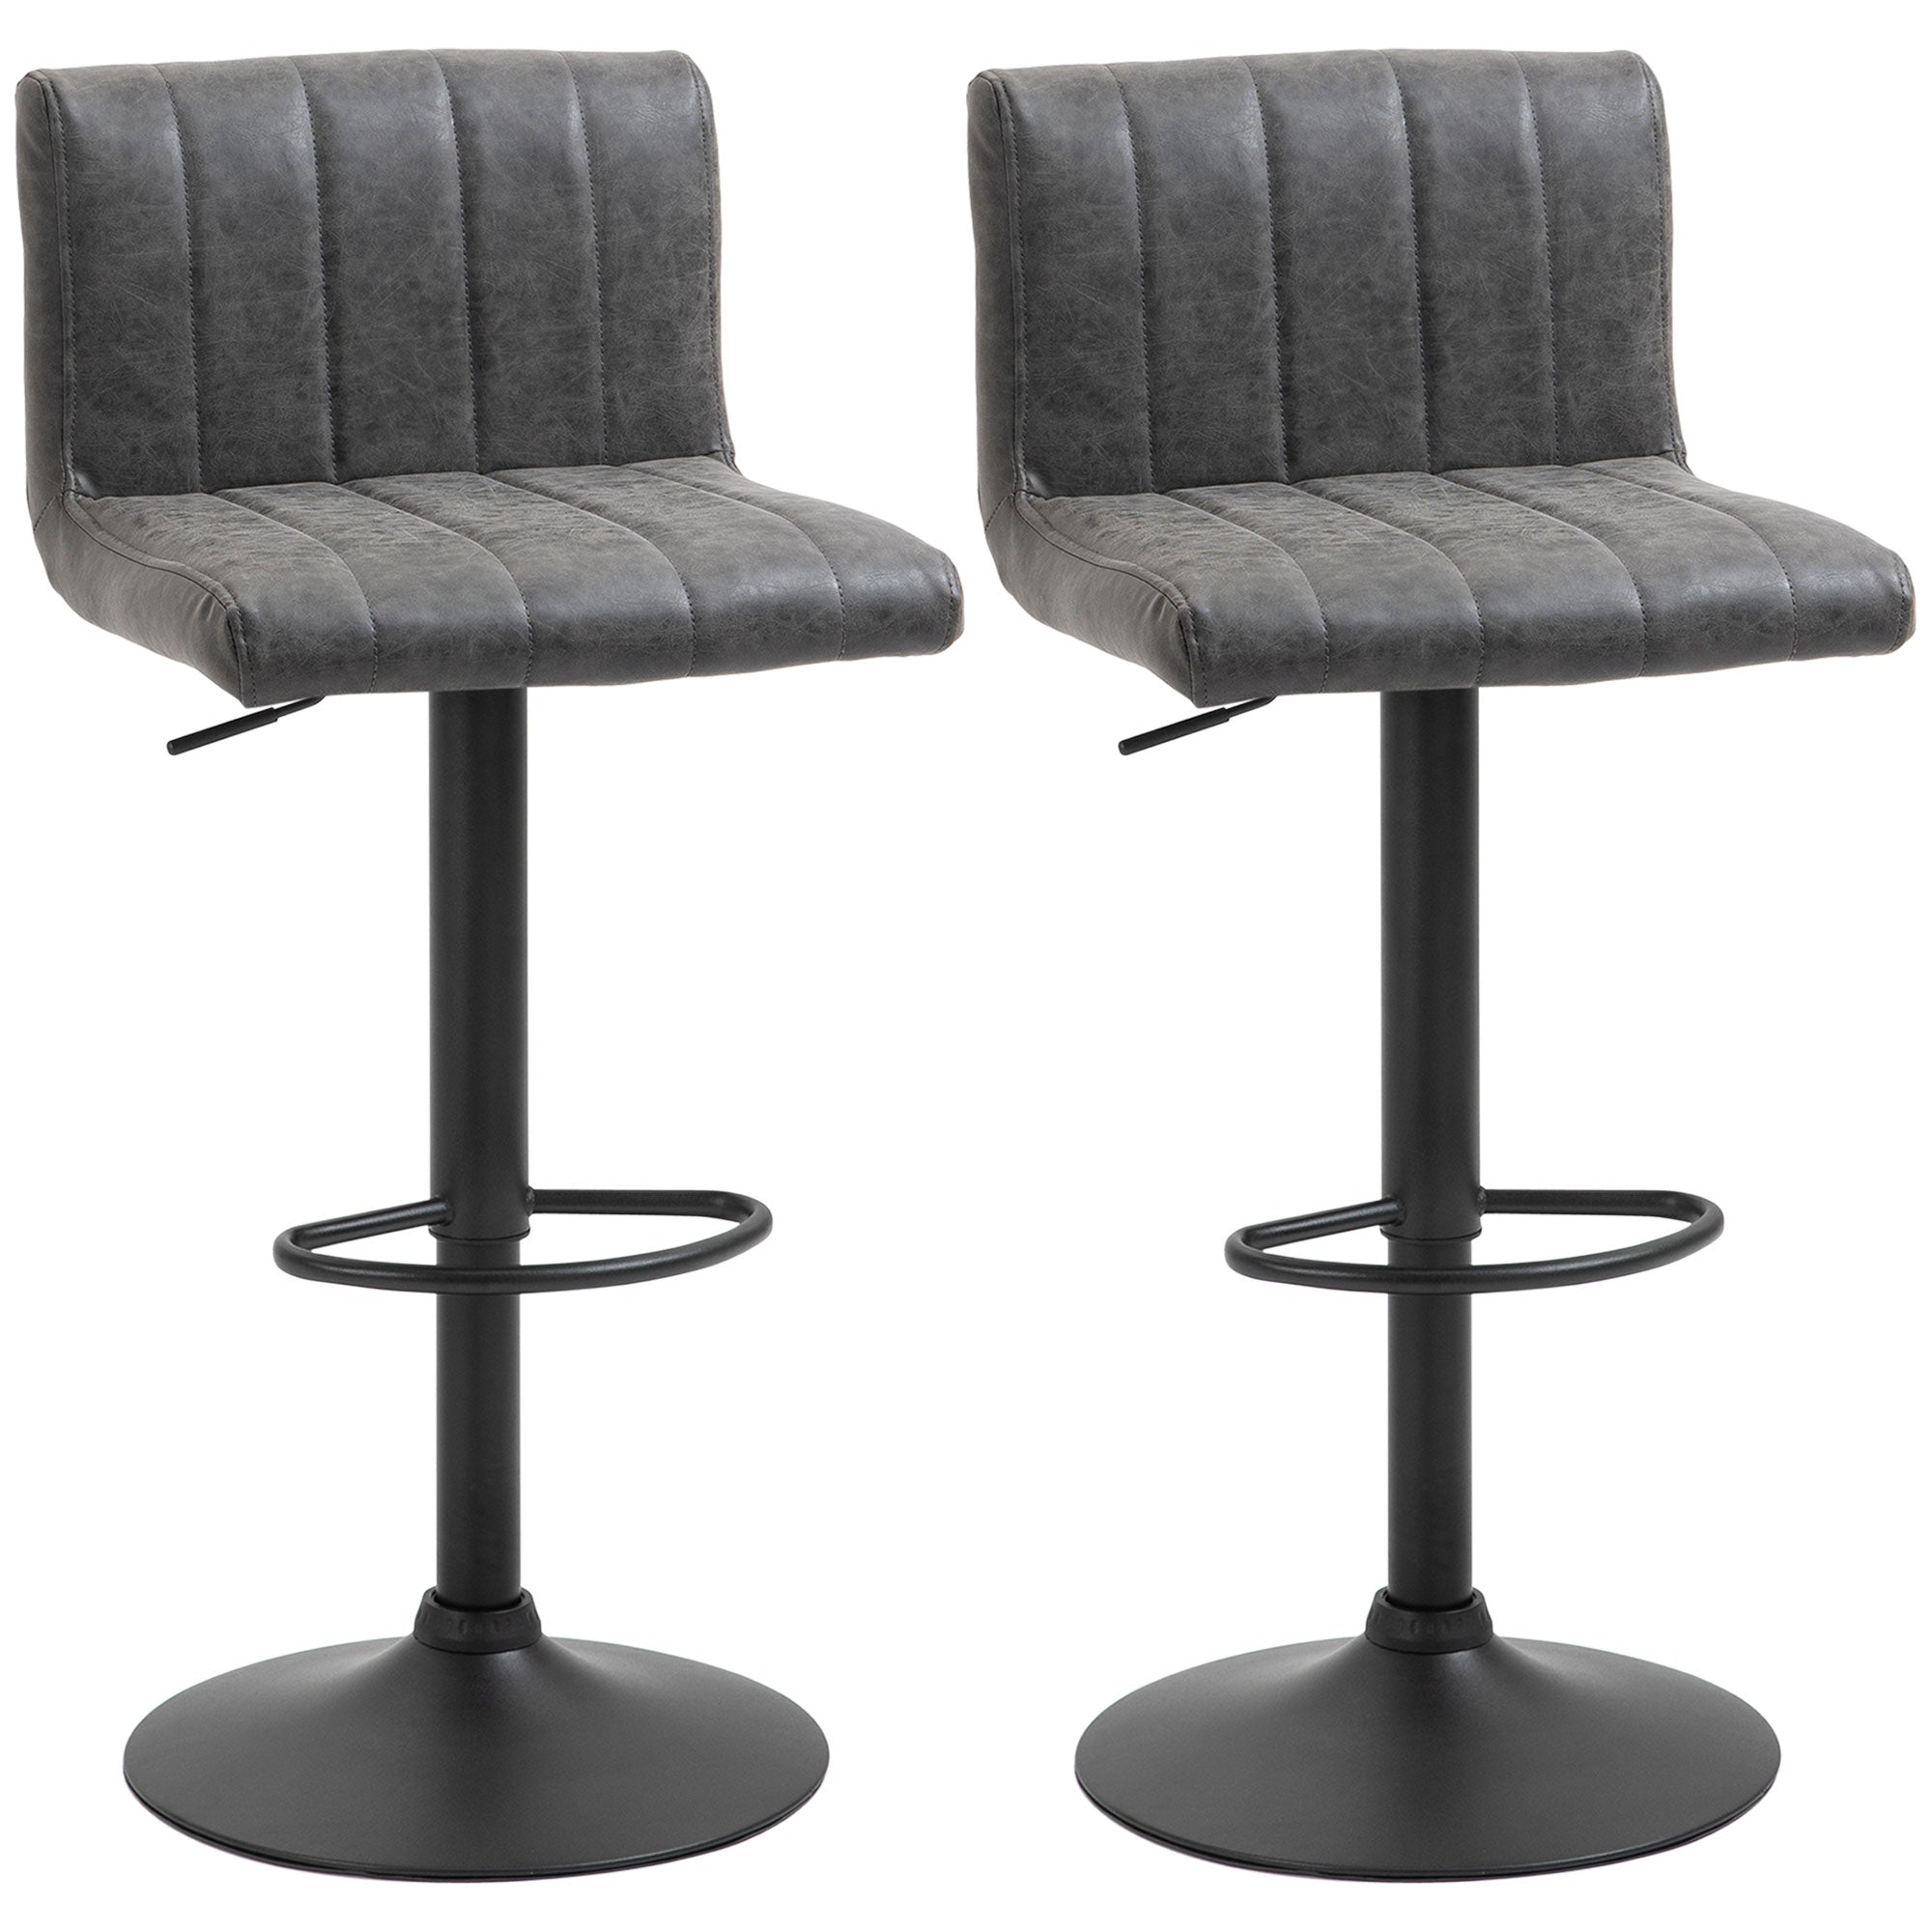 Set of 2 Adjustable Height Bar Chairs with Footrest, PU Leather, Gas Lift, Grey  AOSOM   